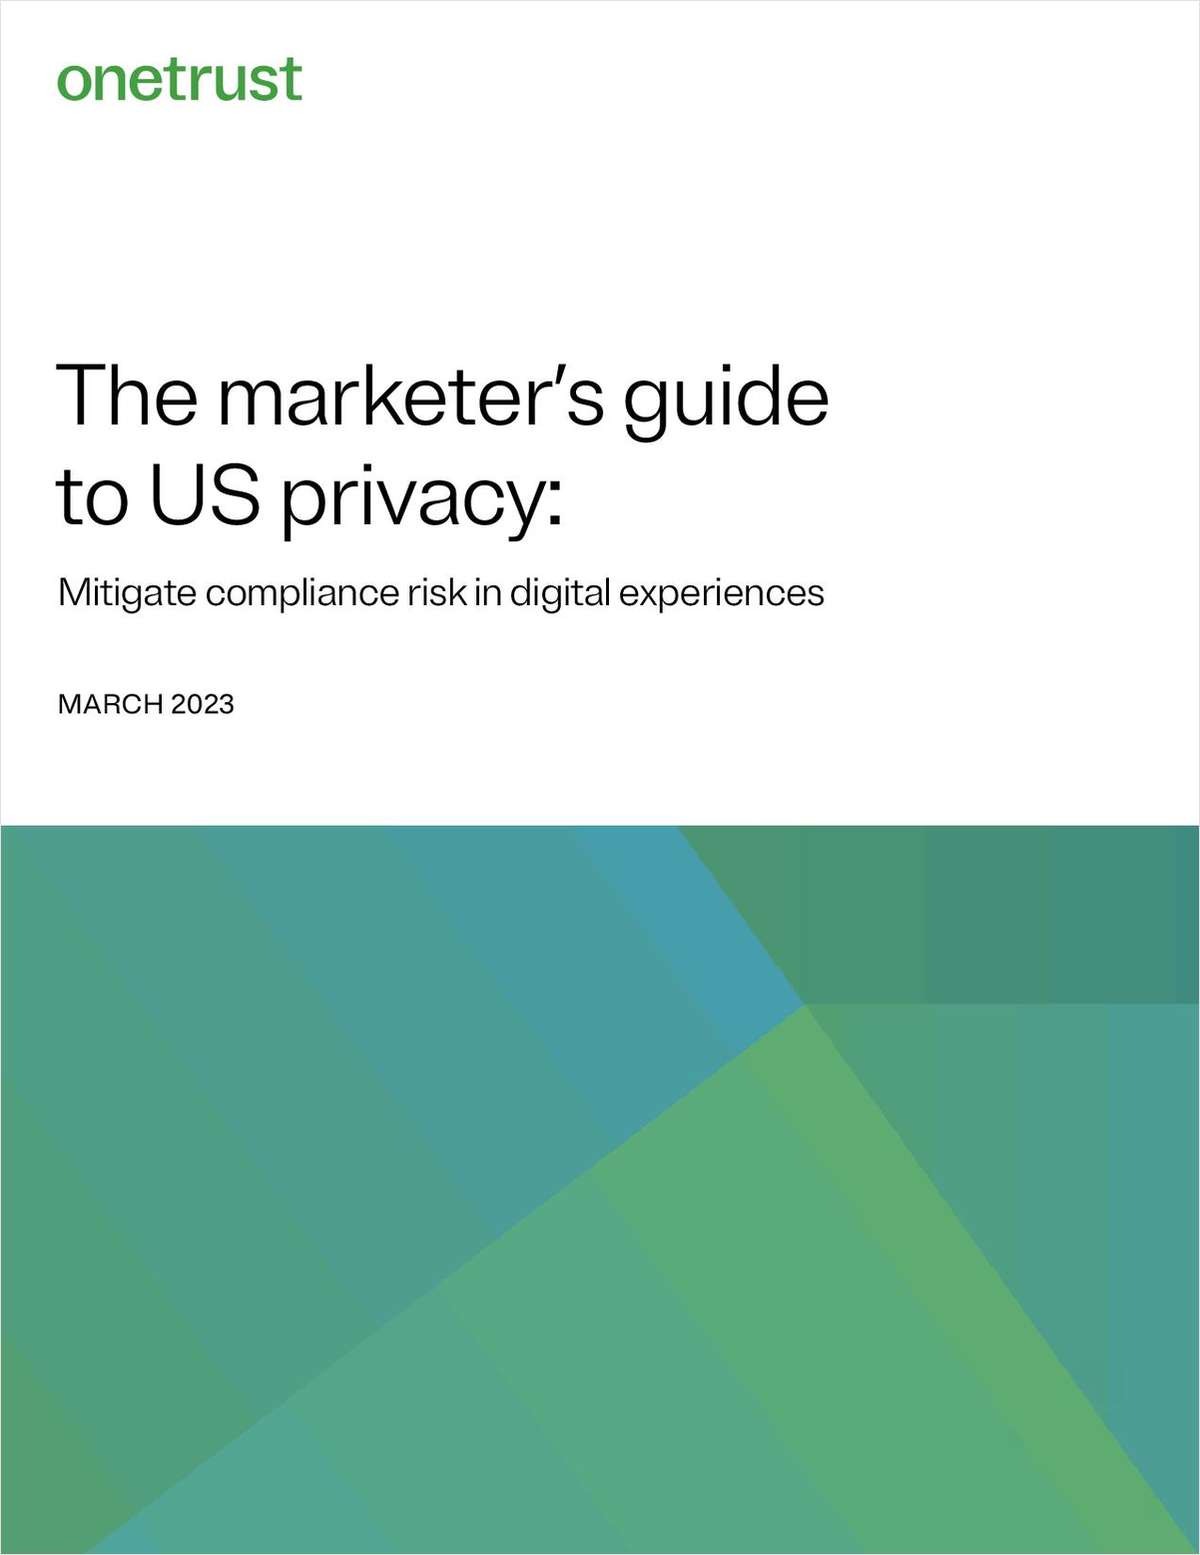 The Marketer's Guide to US Privacy, Free OneTrust eBook